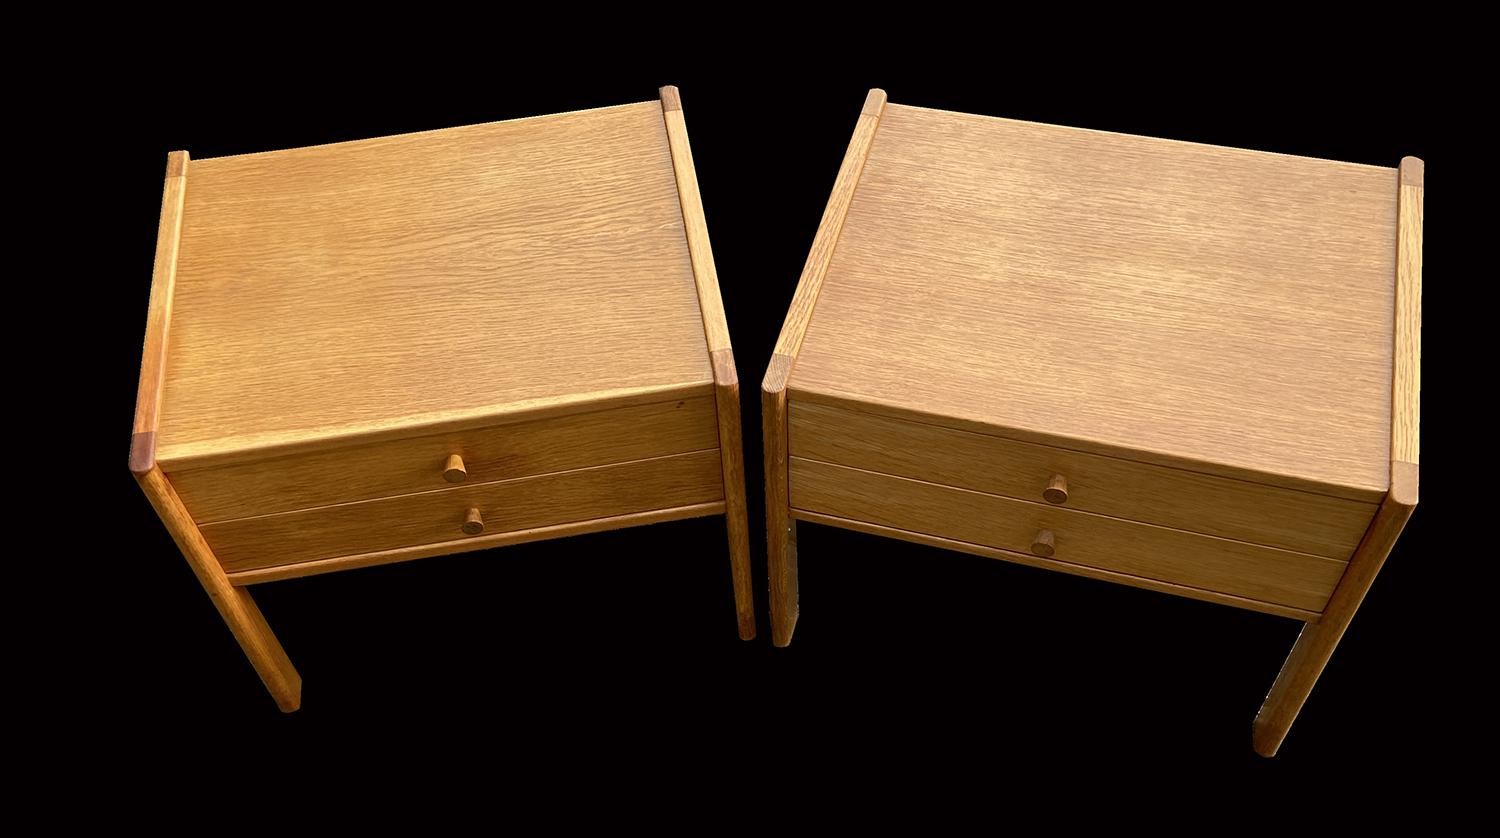 A nice pair of oak bedside tables. Unfortunately we do not know the designer or makers, but good value for money!